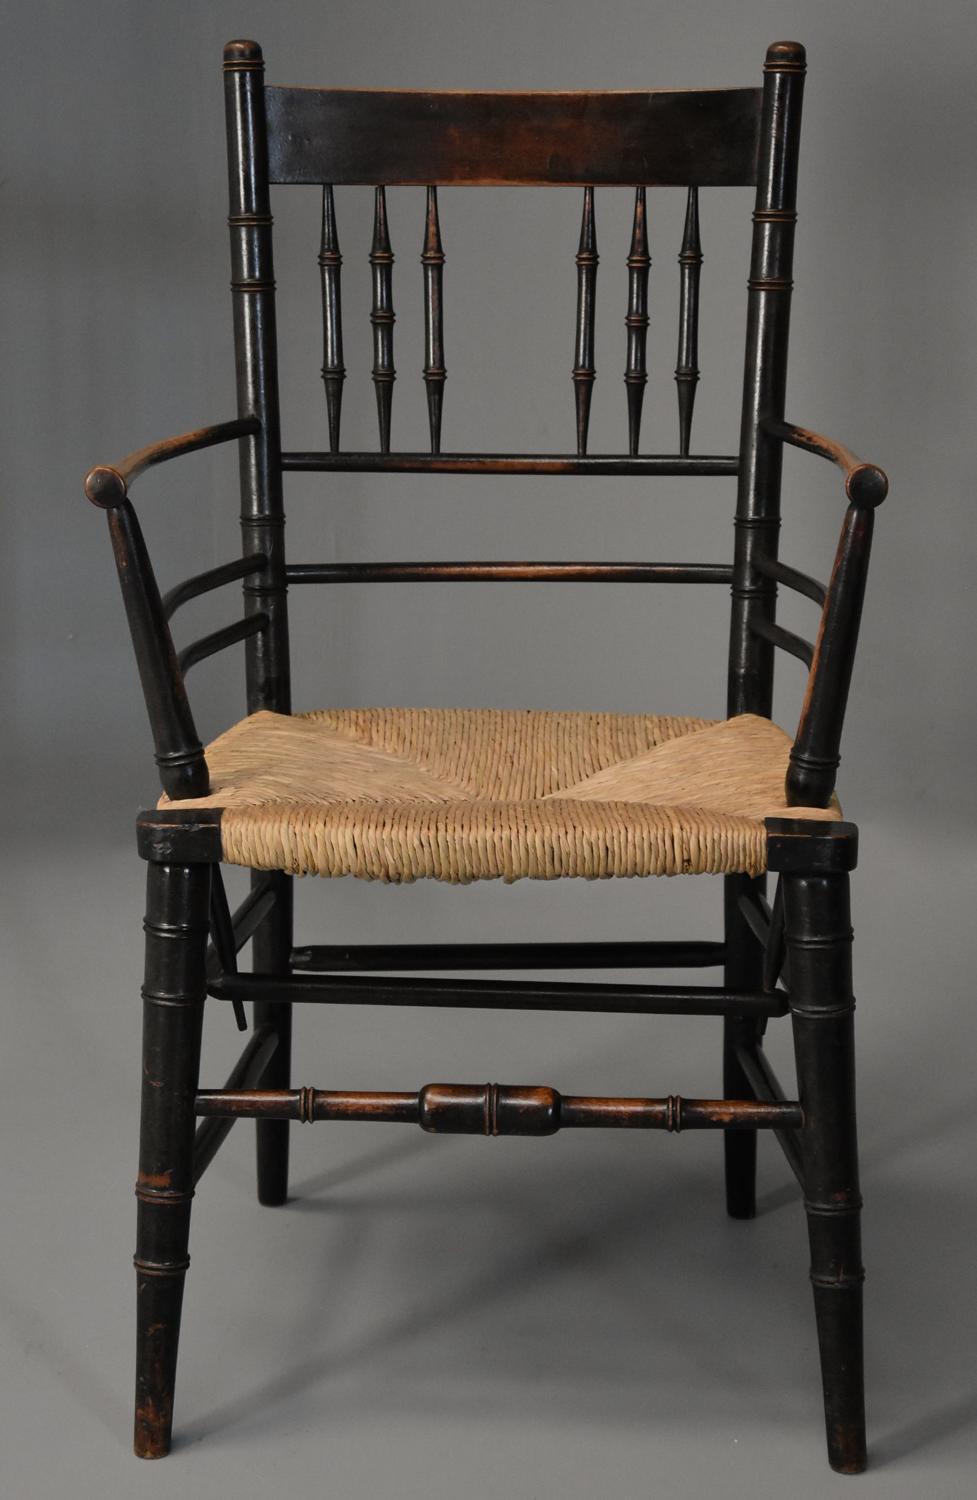 Late 19th century ebonised Sussex armchair attributed to Morris & Co.